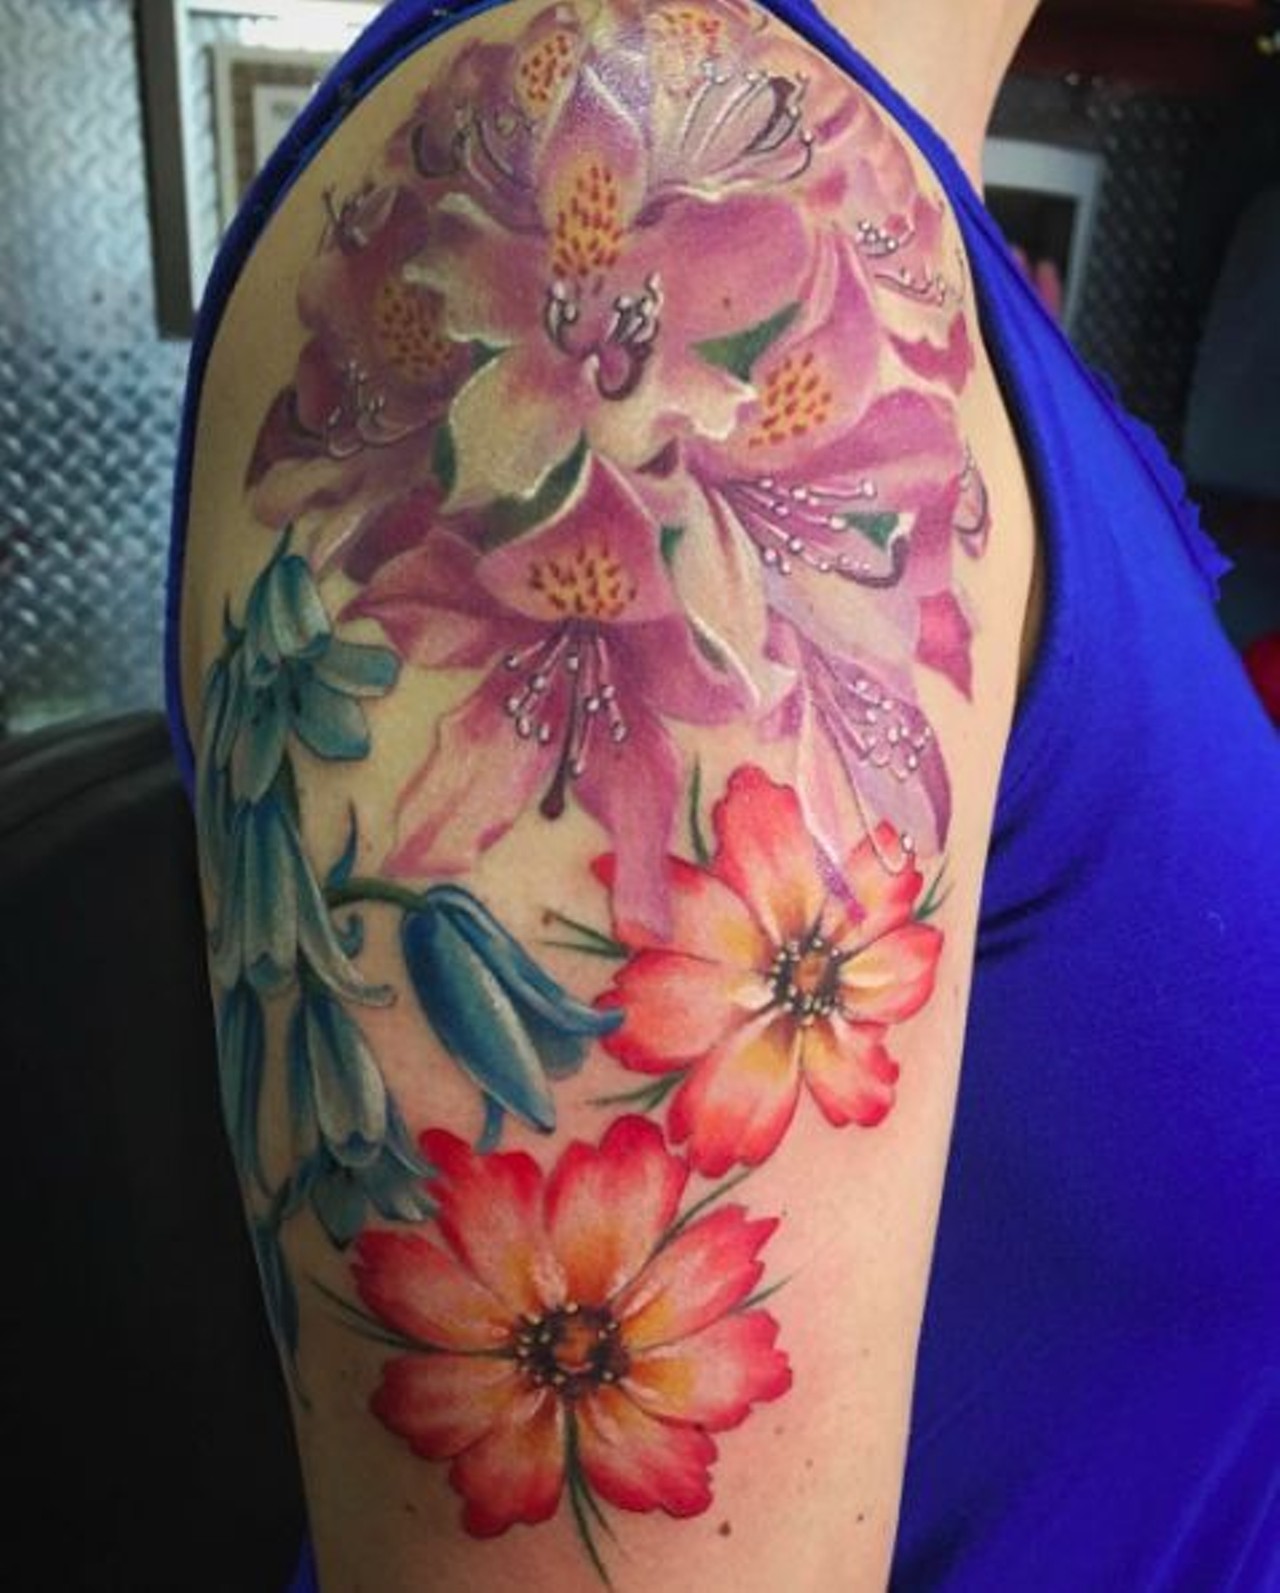 13 Tattoo Artists Share Some Of The Beautiful Flower Tattoos They Have Done